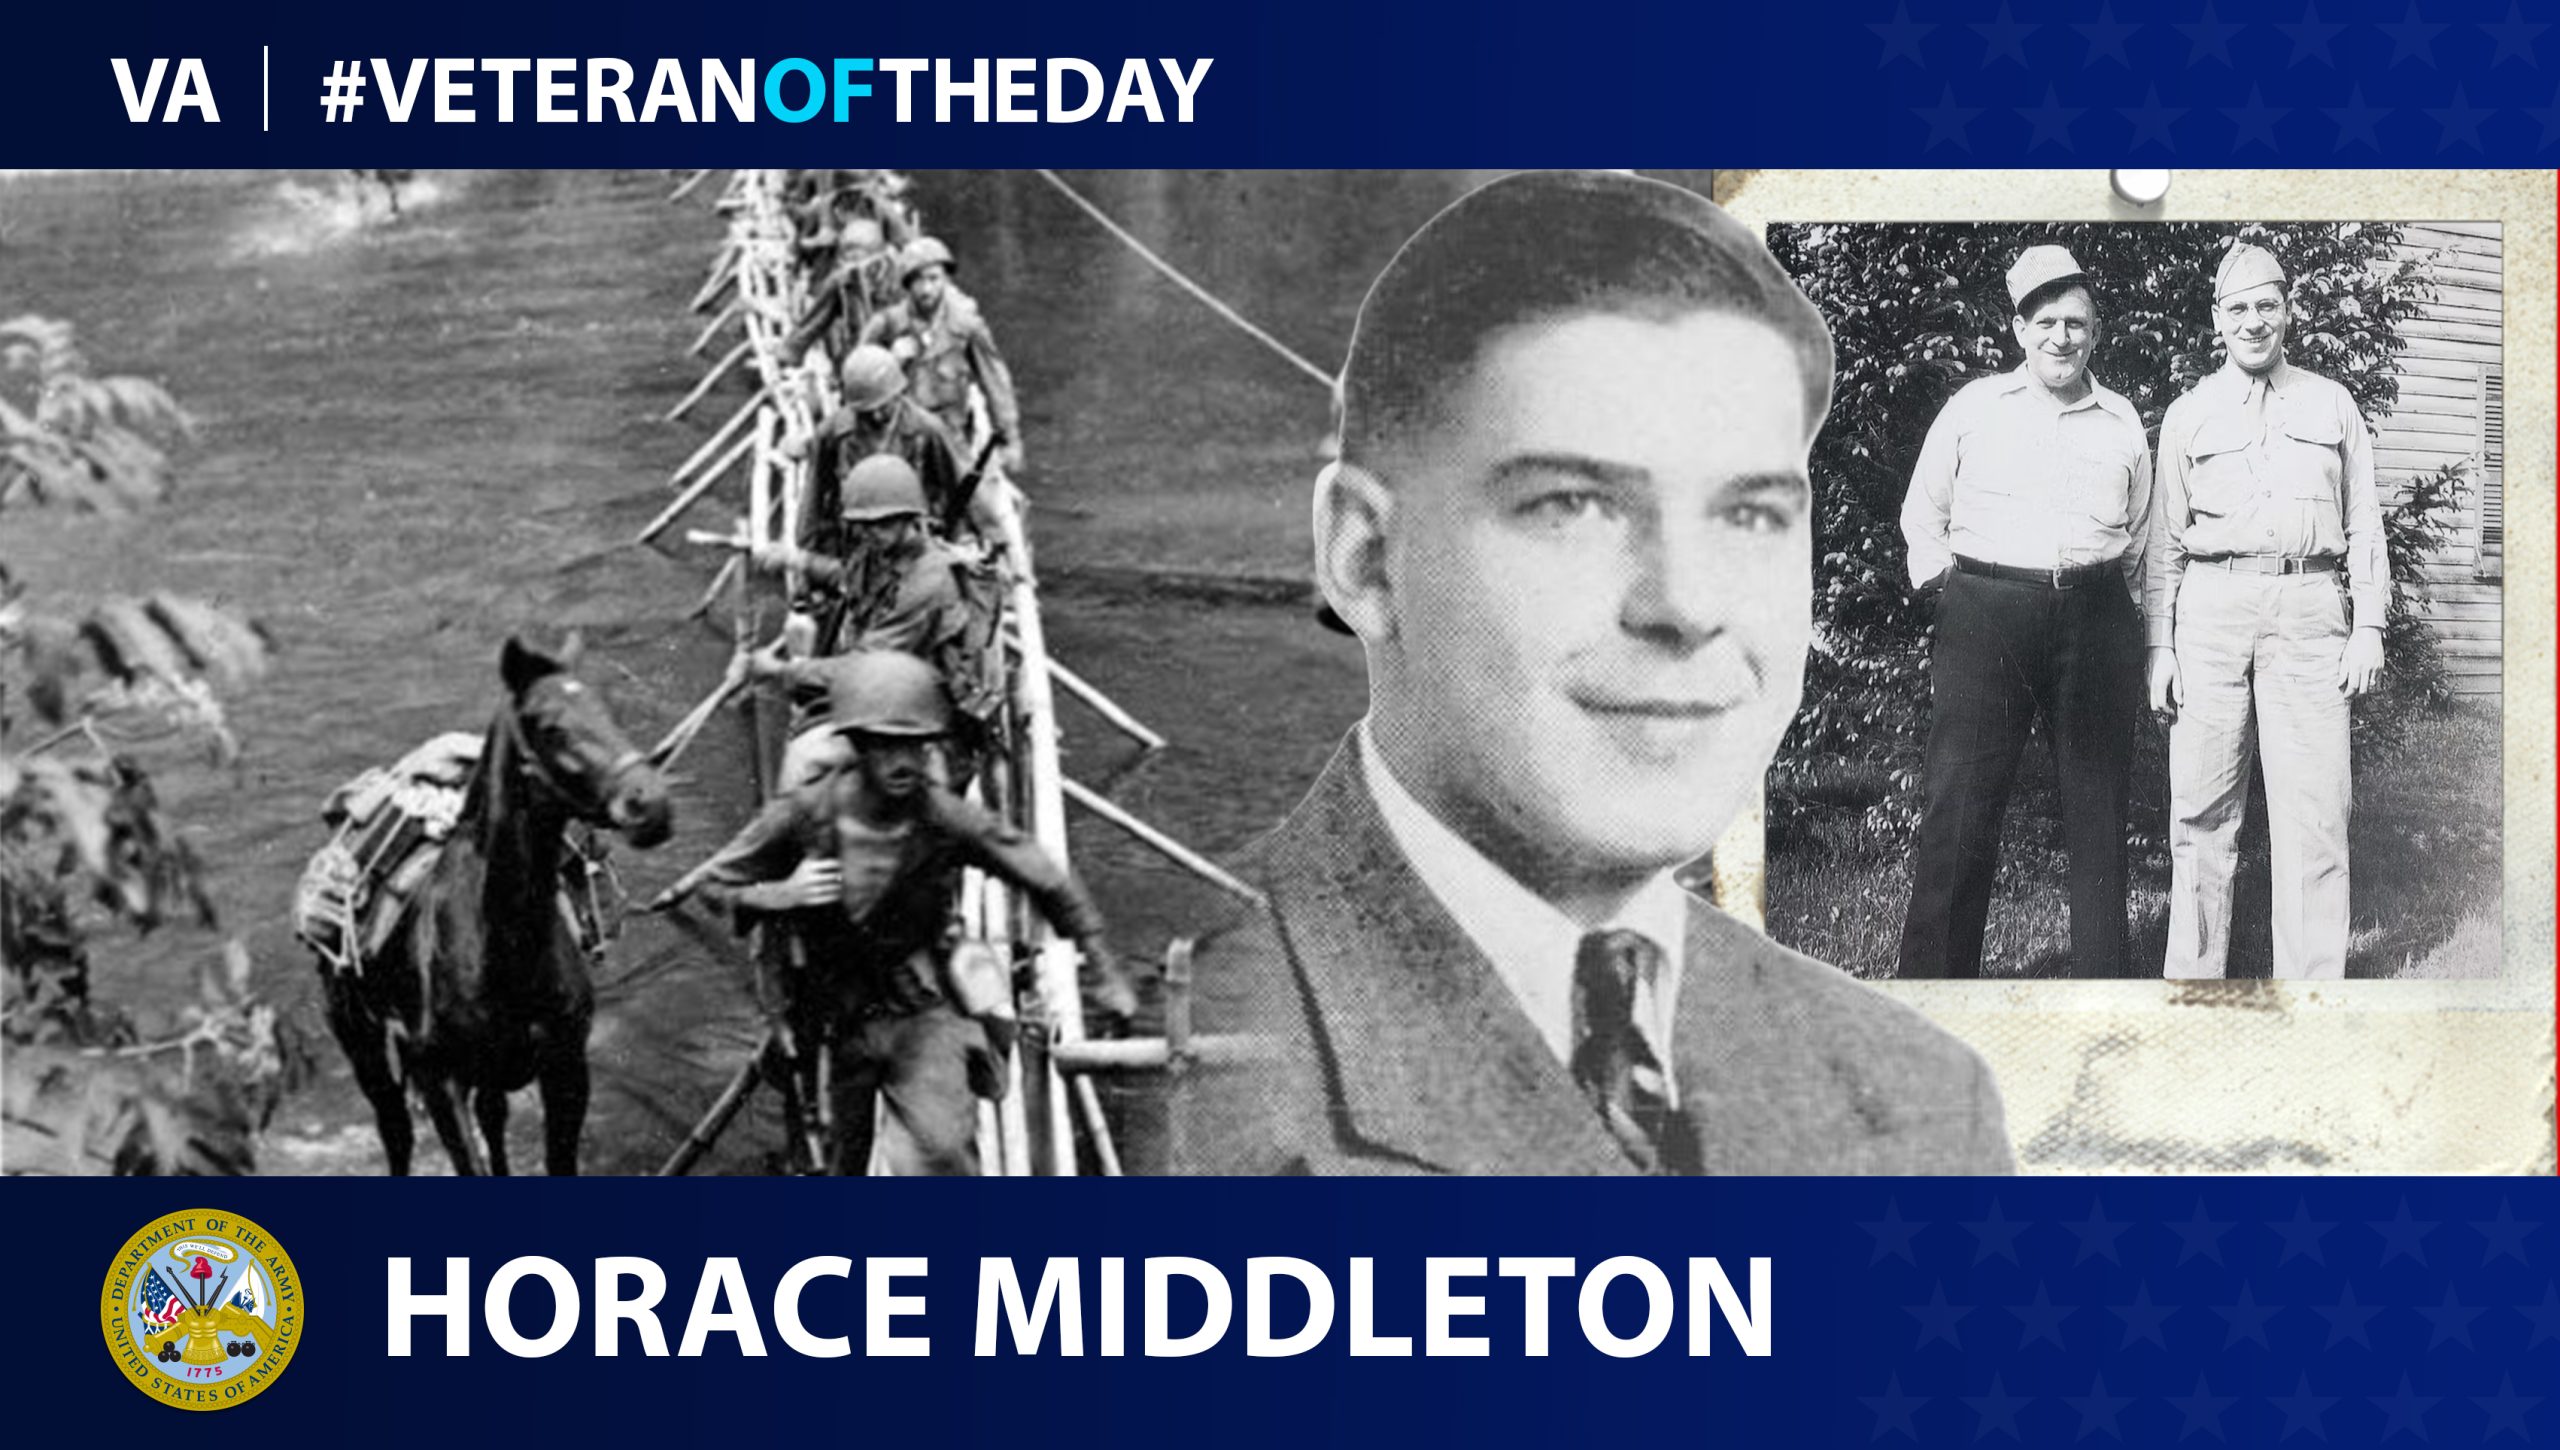 Army Veteran and Merrill’s Marauder Horace Middleton is today’s Veteran of the Day.